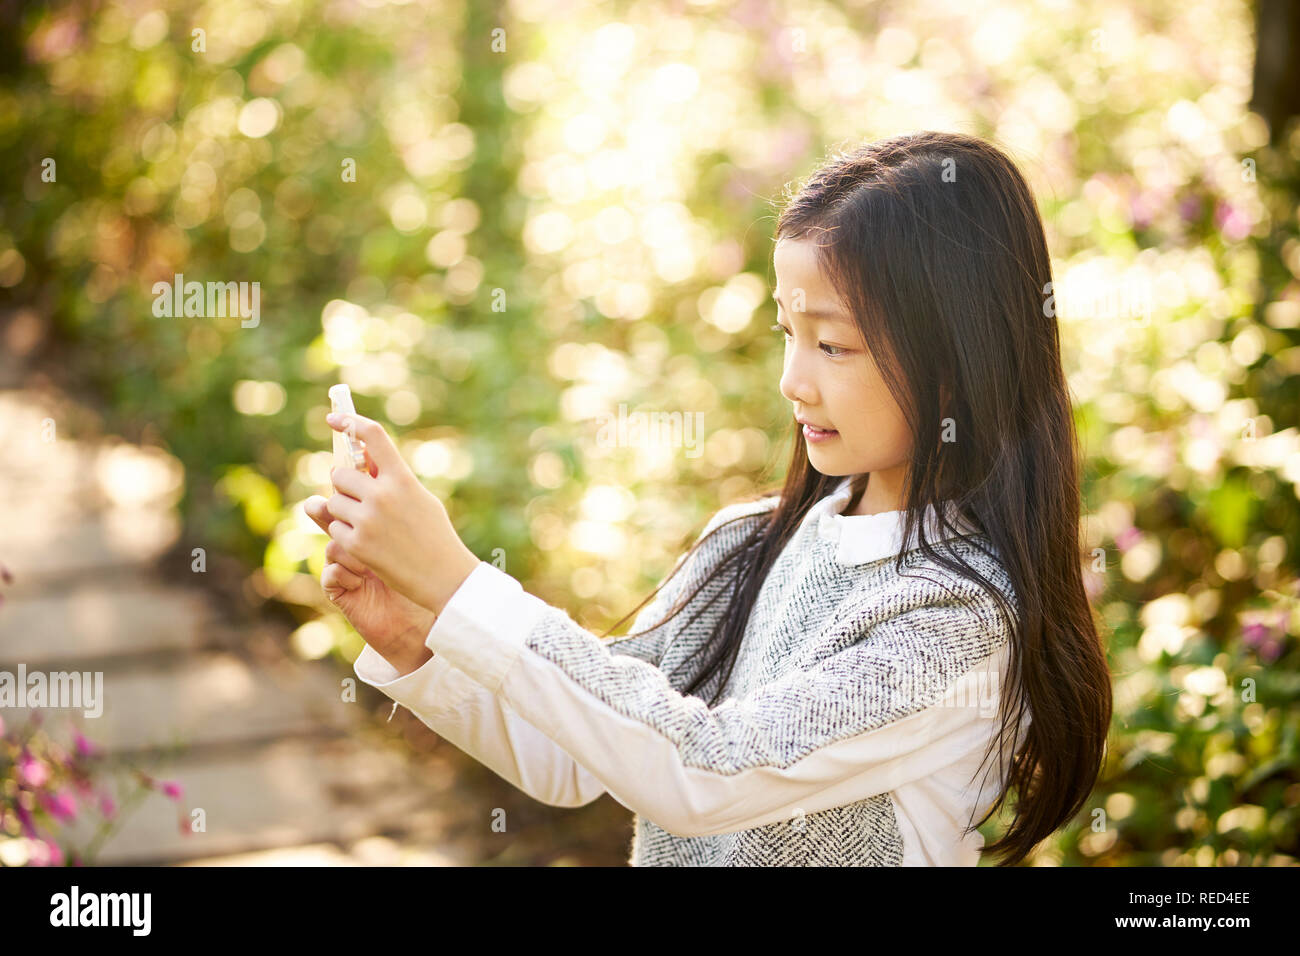 beautiful little asian girl with long hair taking a selfie against flower background using cellphone Stock Photo